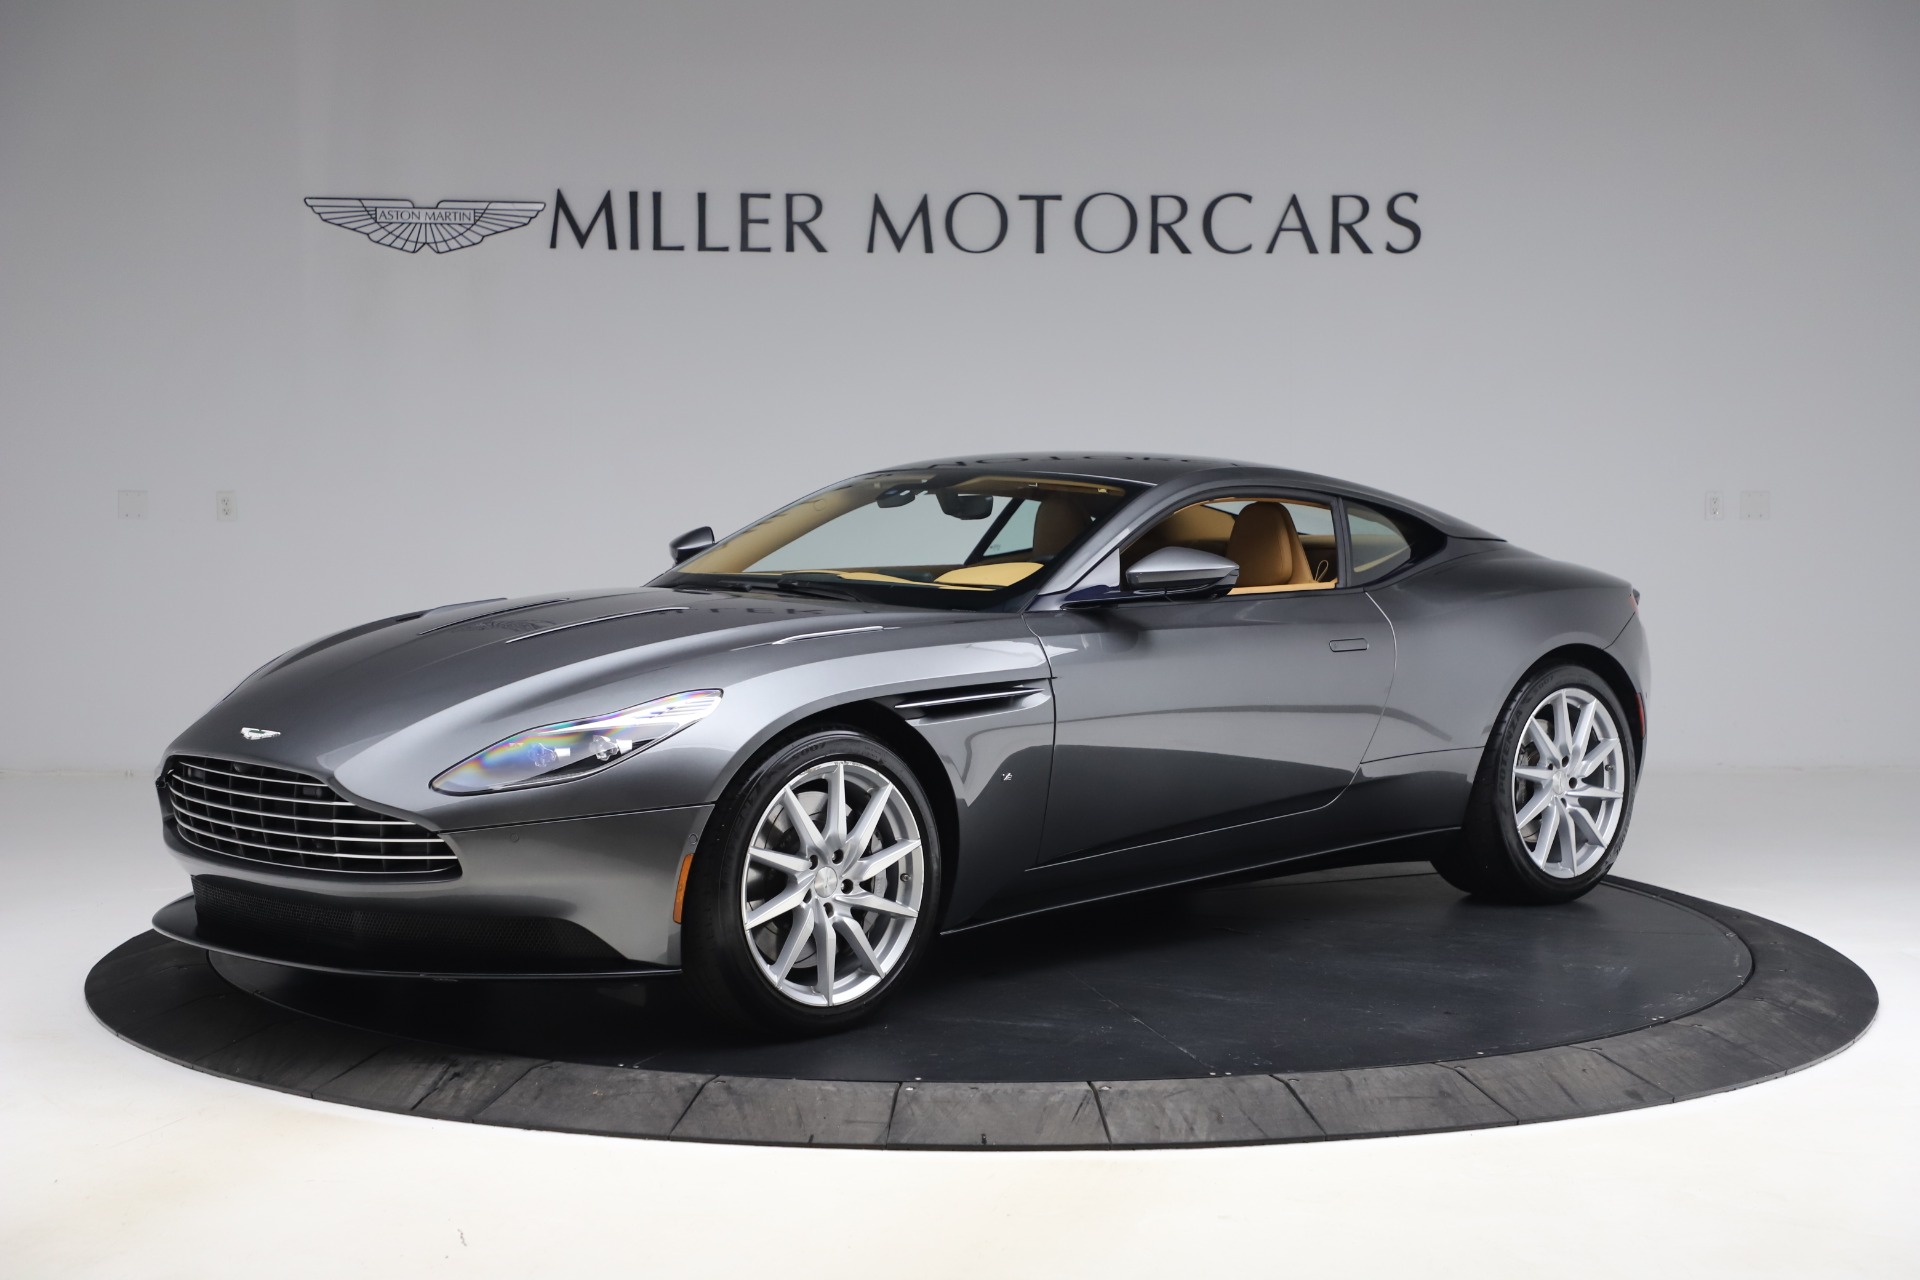 Used 2017 Aston Martin DB11 V12 Coupe for sale Sold at Alfa Romeo of Greenwich in Greenwich CT 06830 1